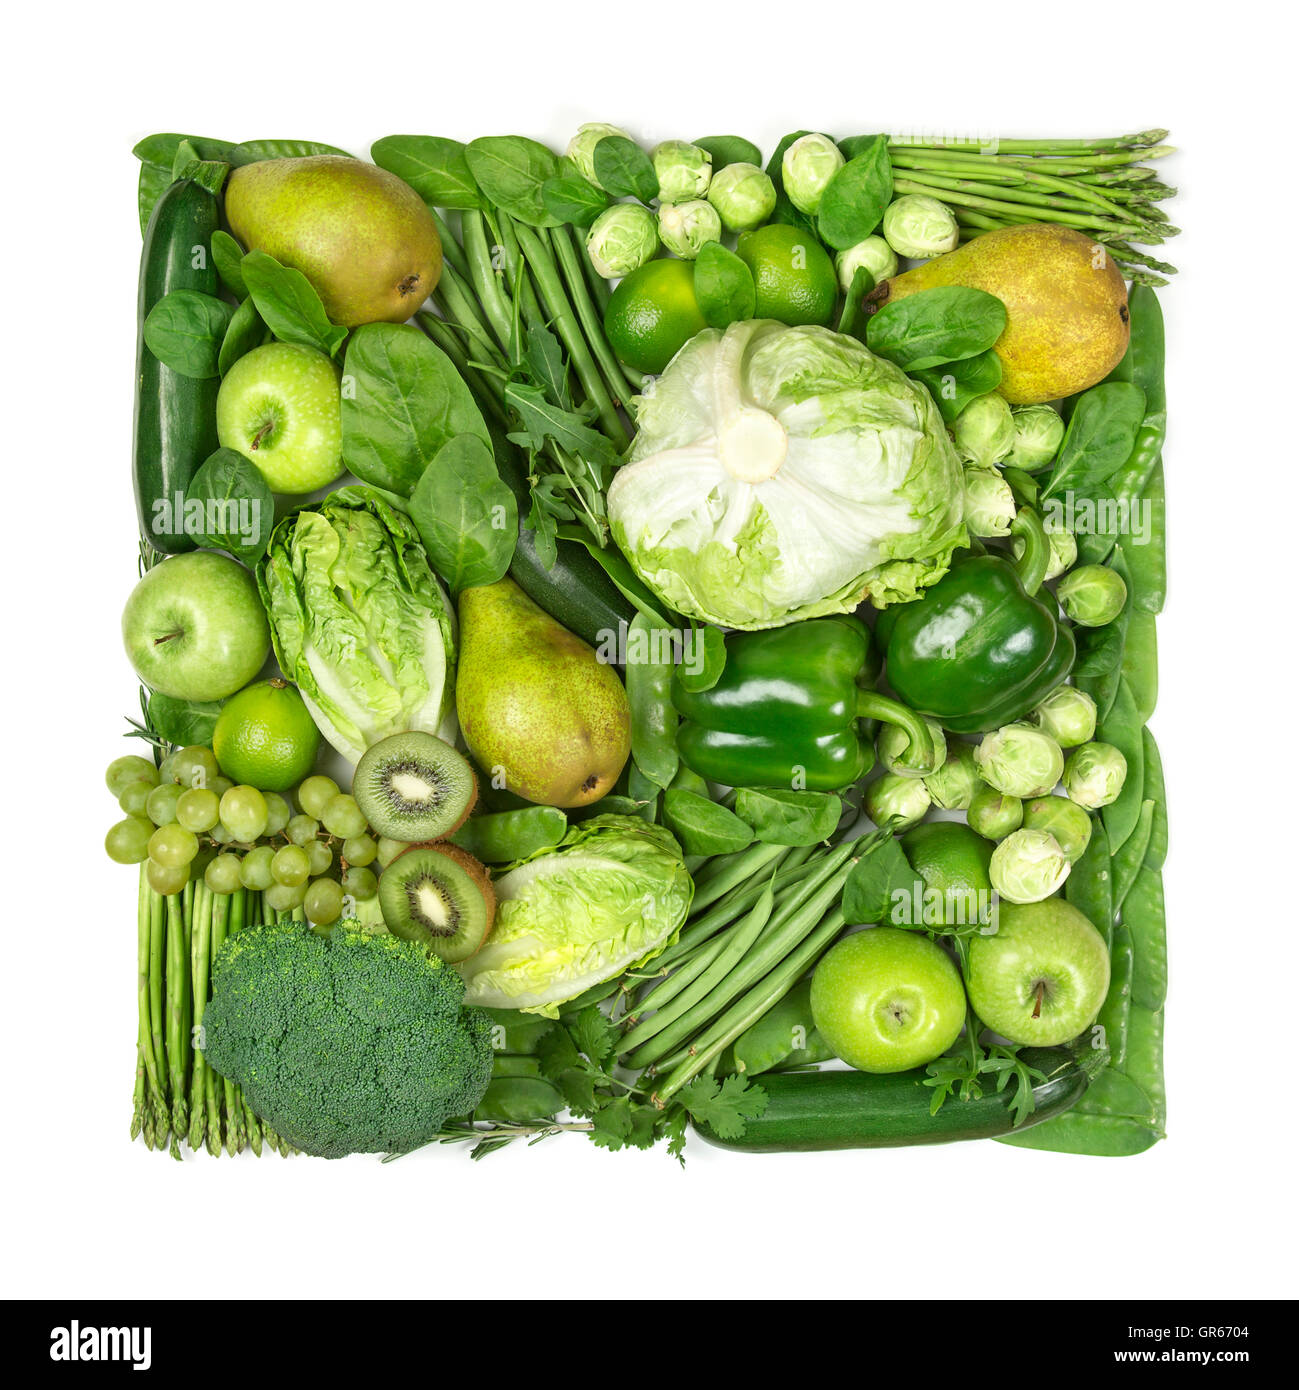 Square of green fruits and vegetables isolated on a white background Stock Photo